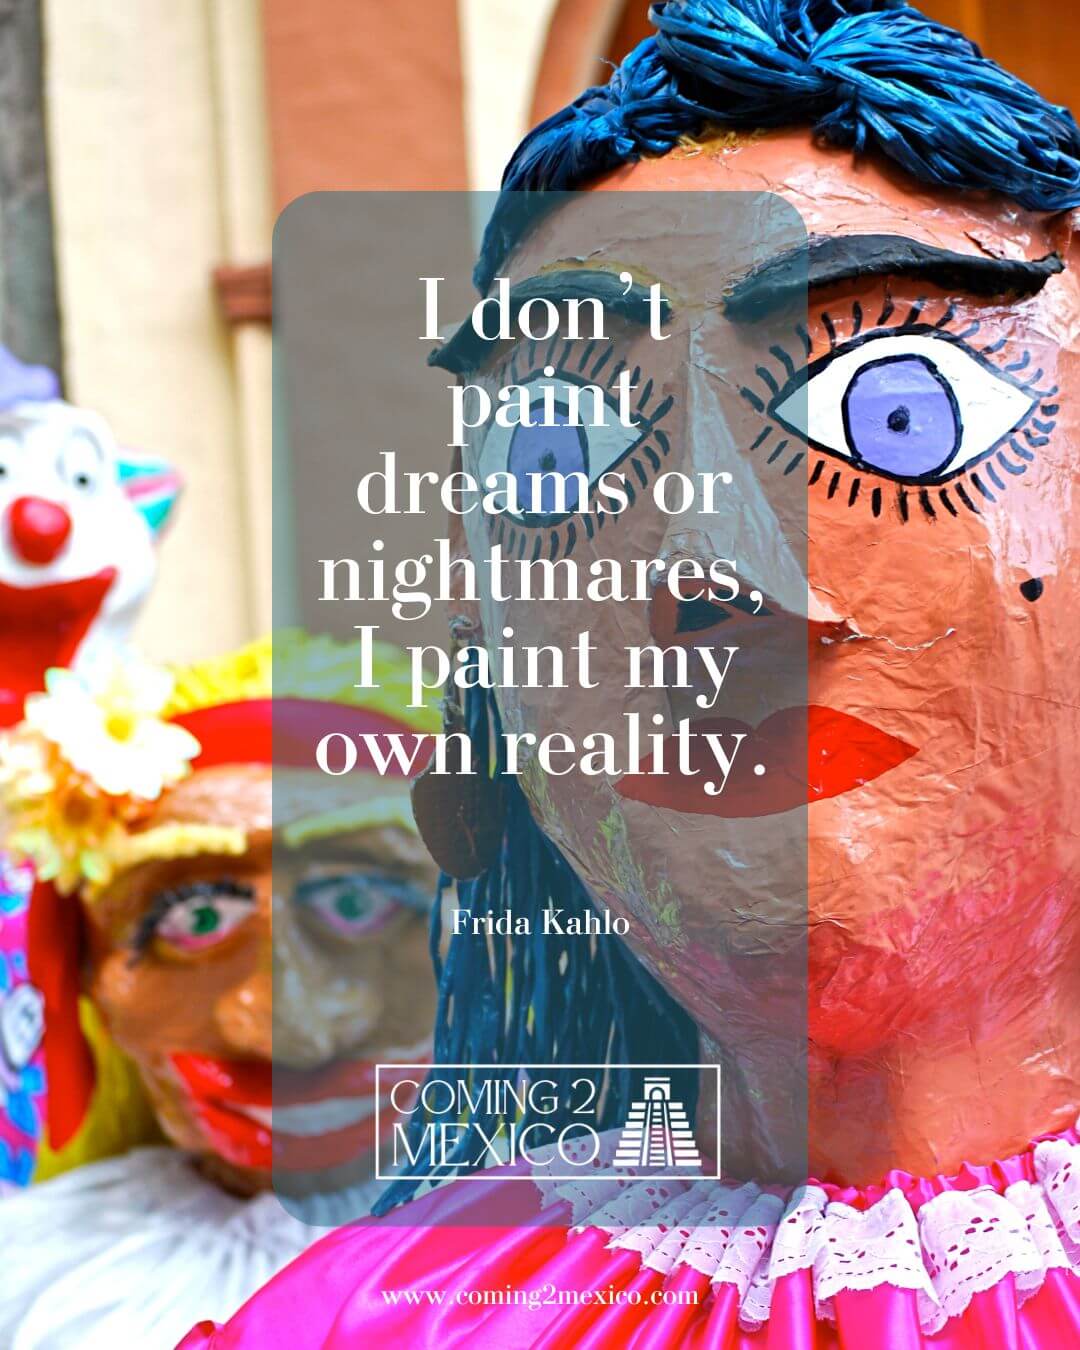 “I don’t paint dreams or nightmares, I paint my own reality.” - Frida Kahlo